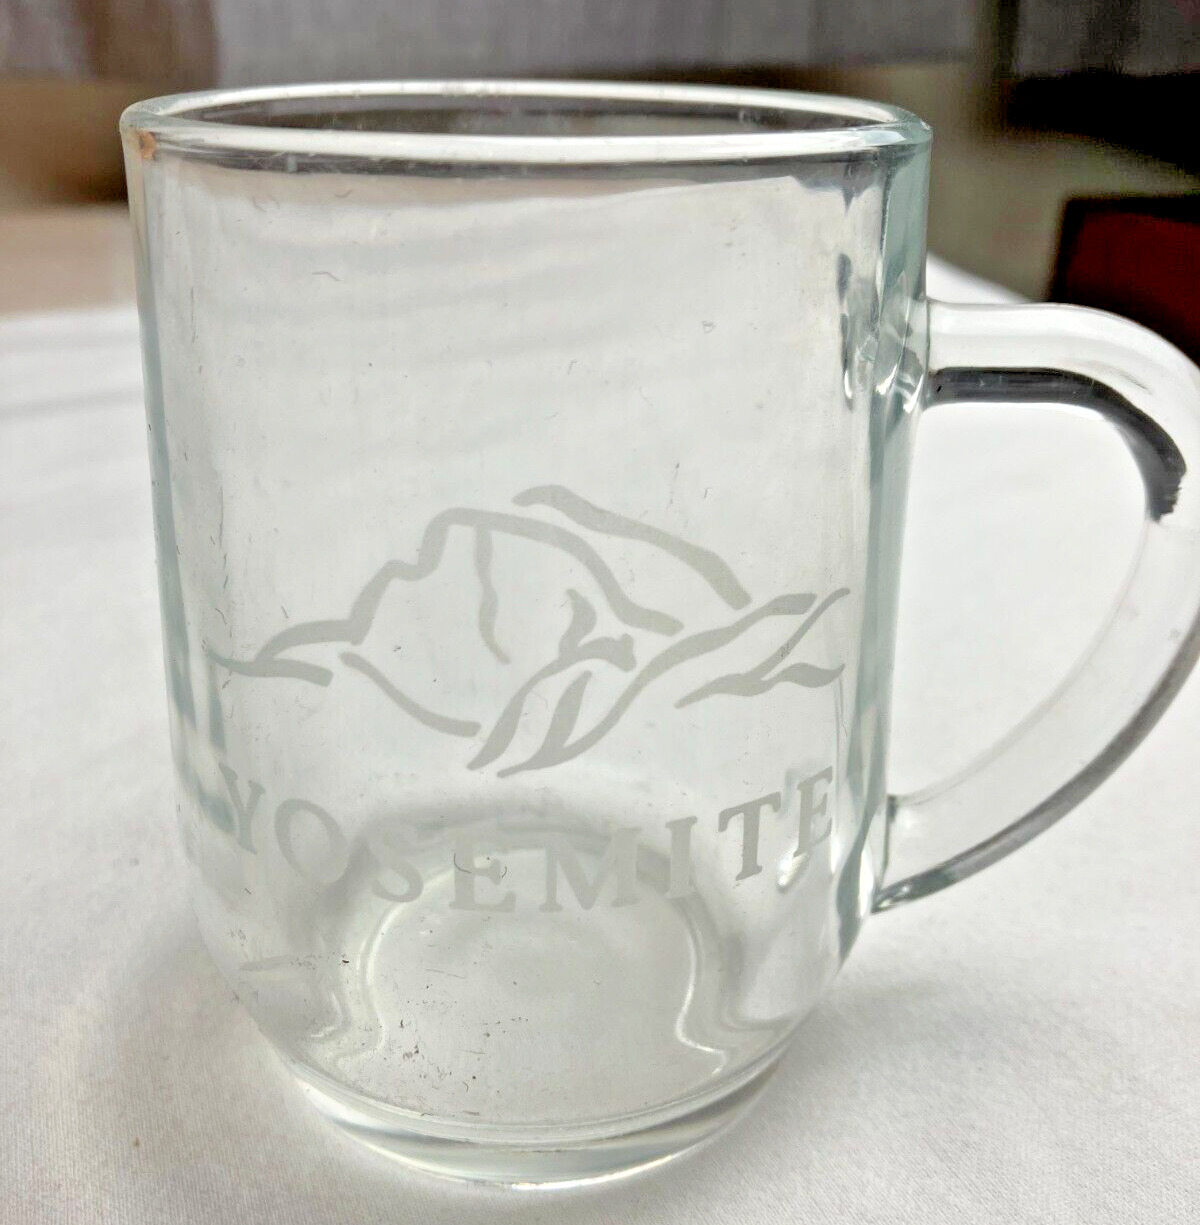 Vintage clear glass etched mug Yosemite made in USA